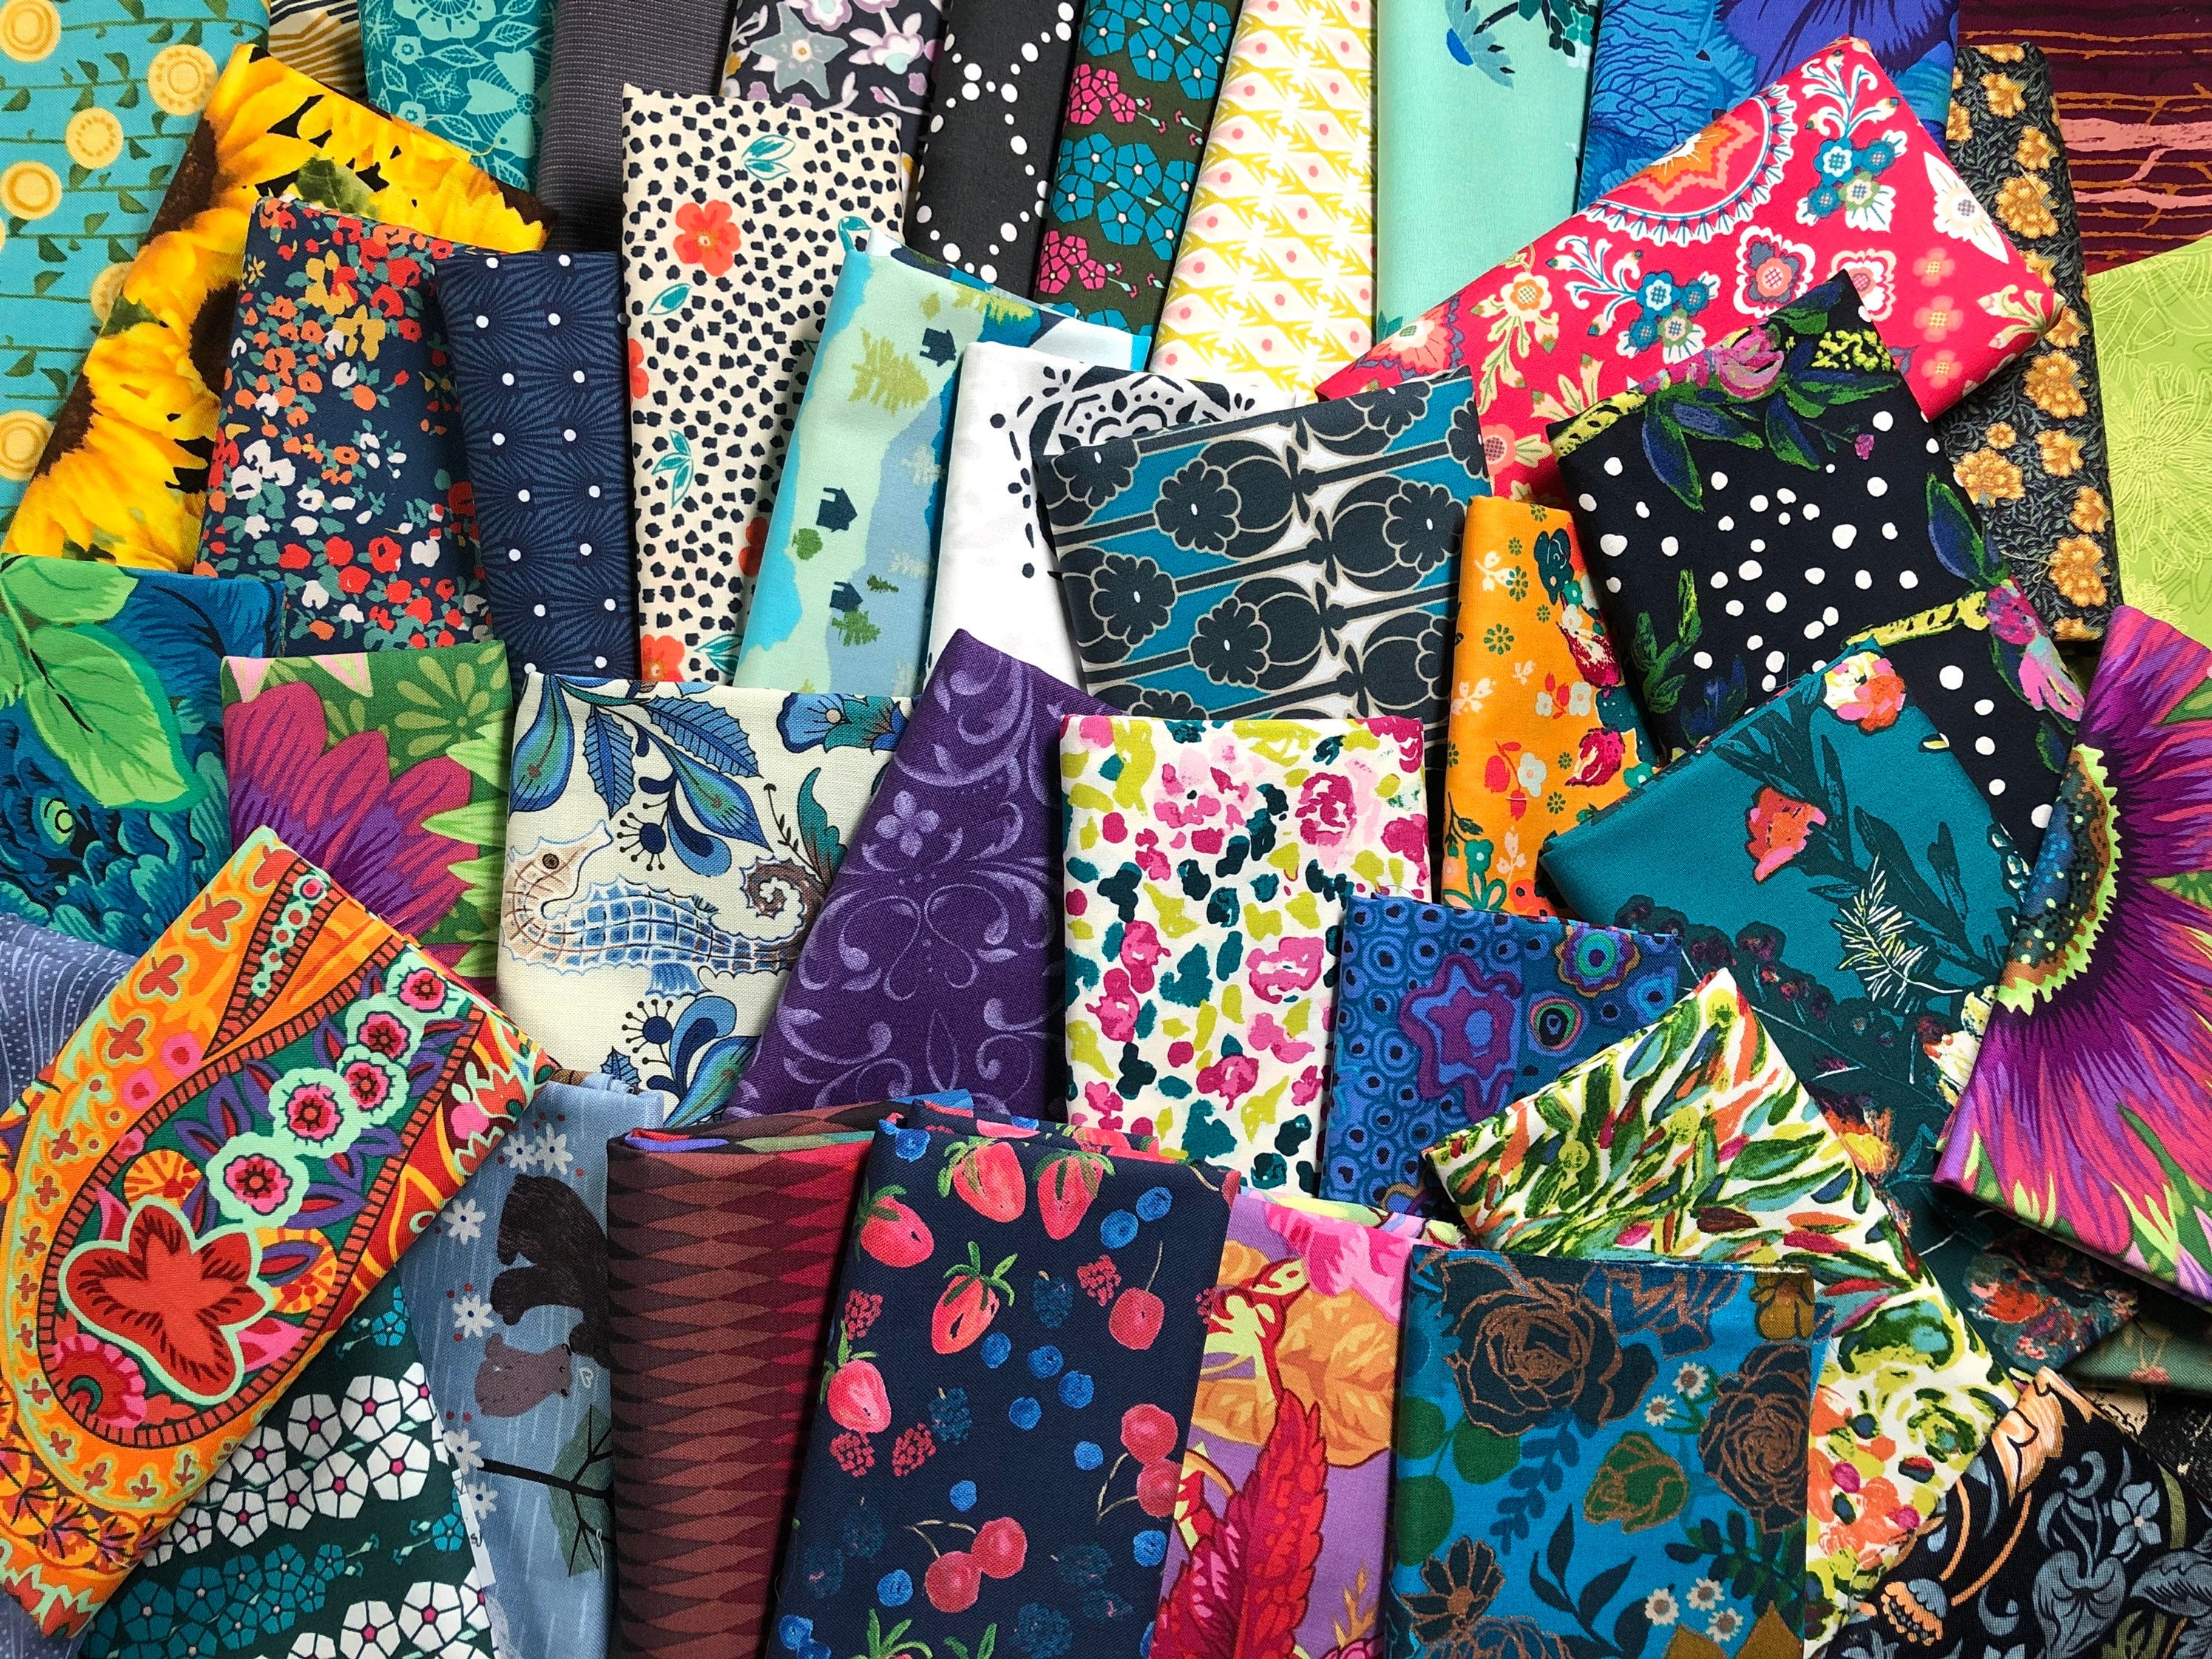 Scrap Fabric by the pound